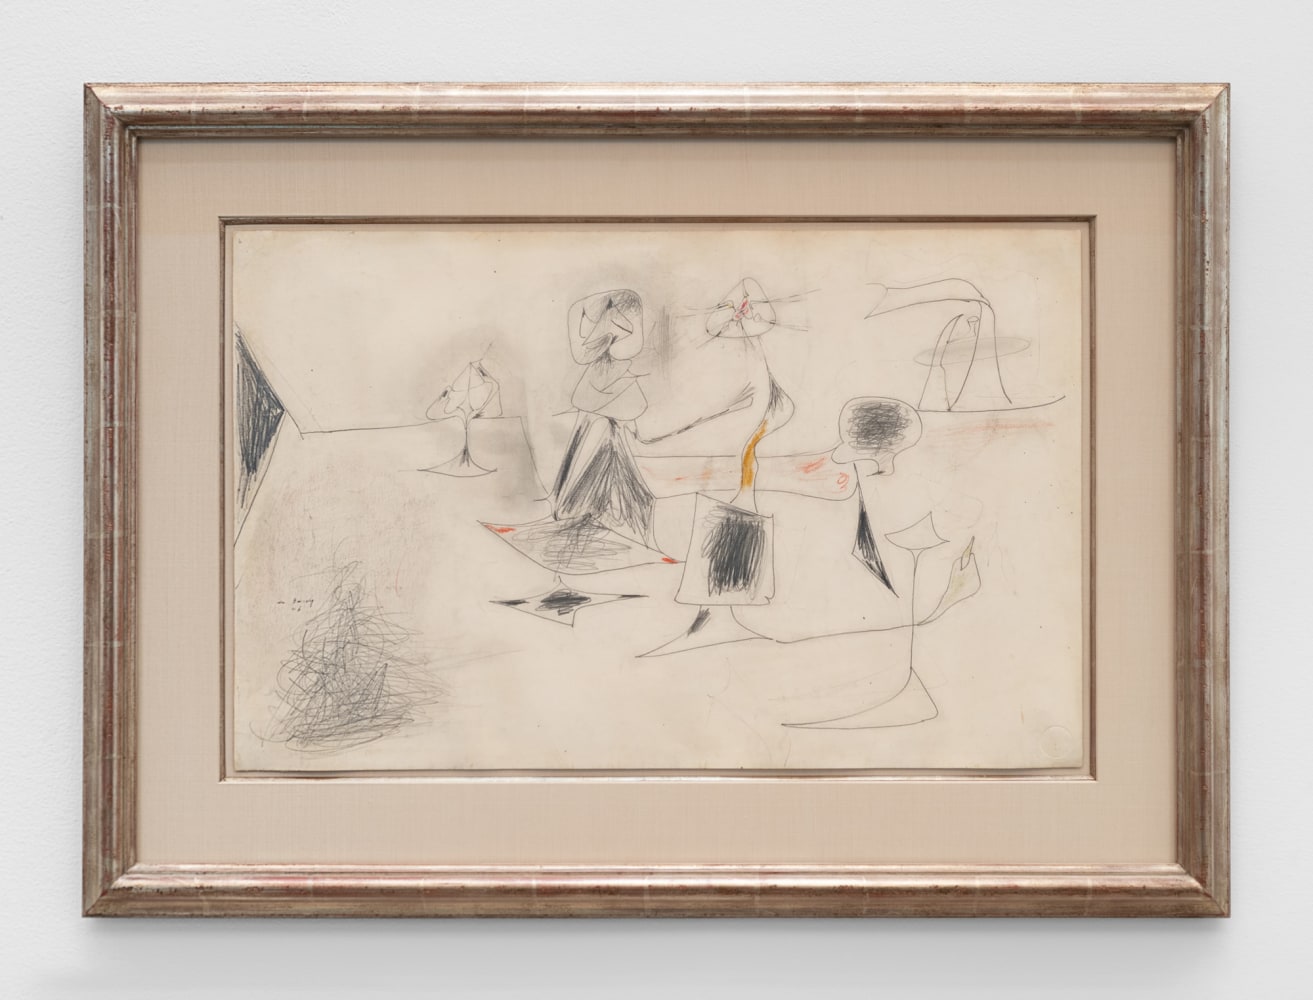 Arshile Gorky
Untitled, 1946
Pencil and crayon on Strathmore paper
22&amp;nbsp;⅝ &amp;times; 31 1/8 &amp;times; 1&amp;nbsp;⅜ in.
(57.5 &amp;times; 79.1 &amp;times; 3.5 cm)
Private Collection
&amp;nbsp;